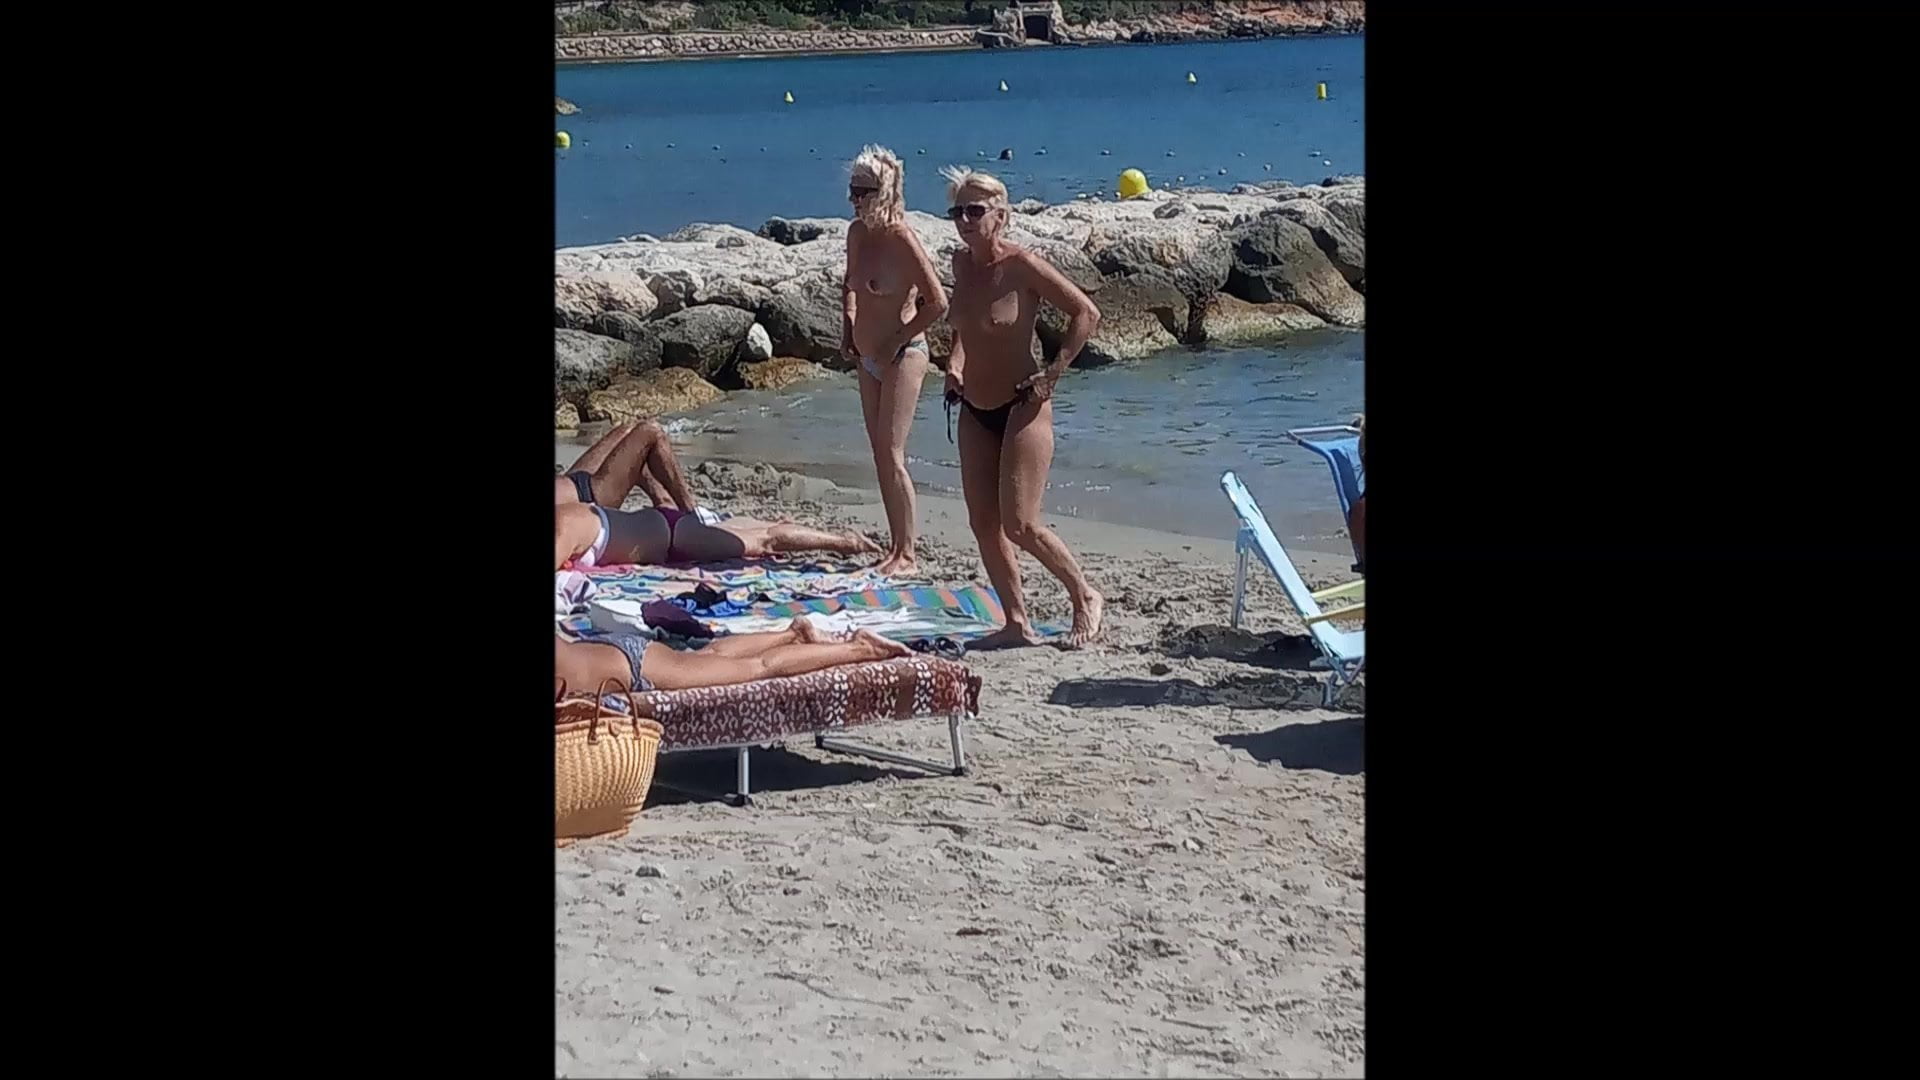 French MILF tanned on the french riviera 